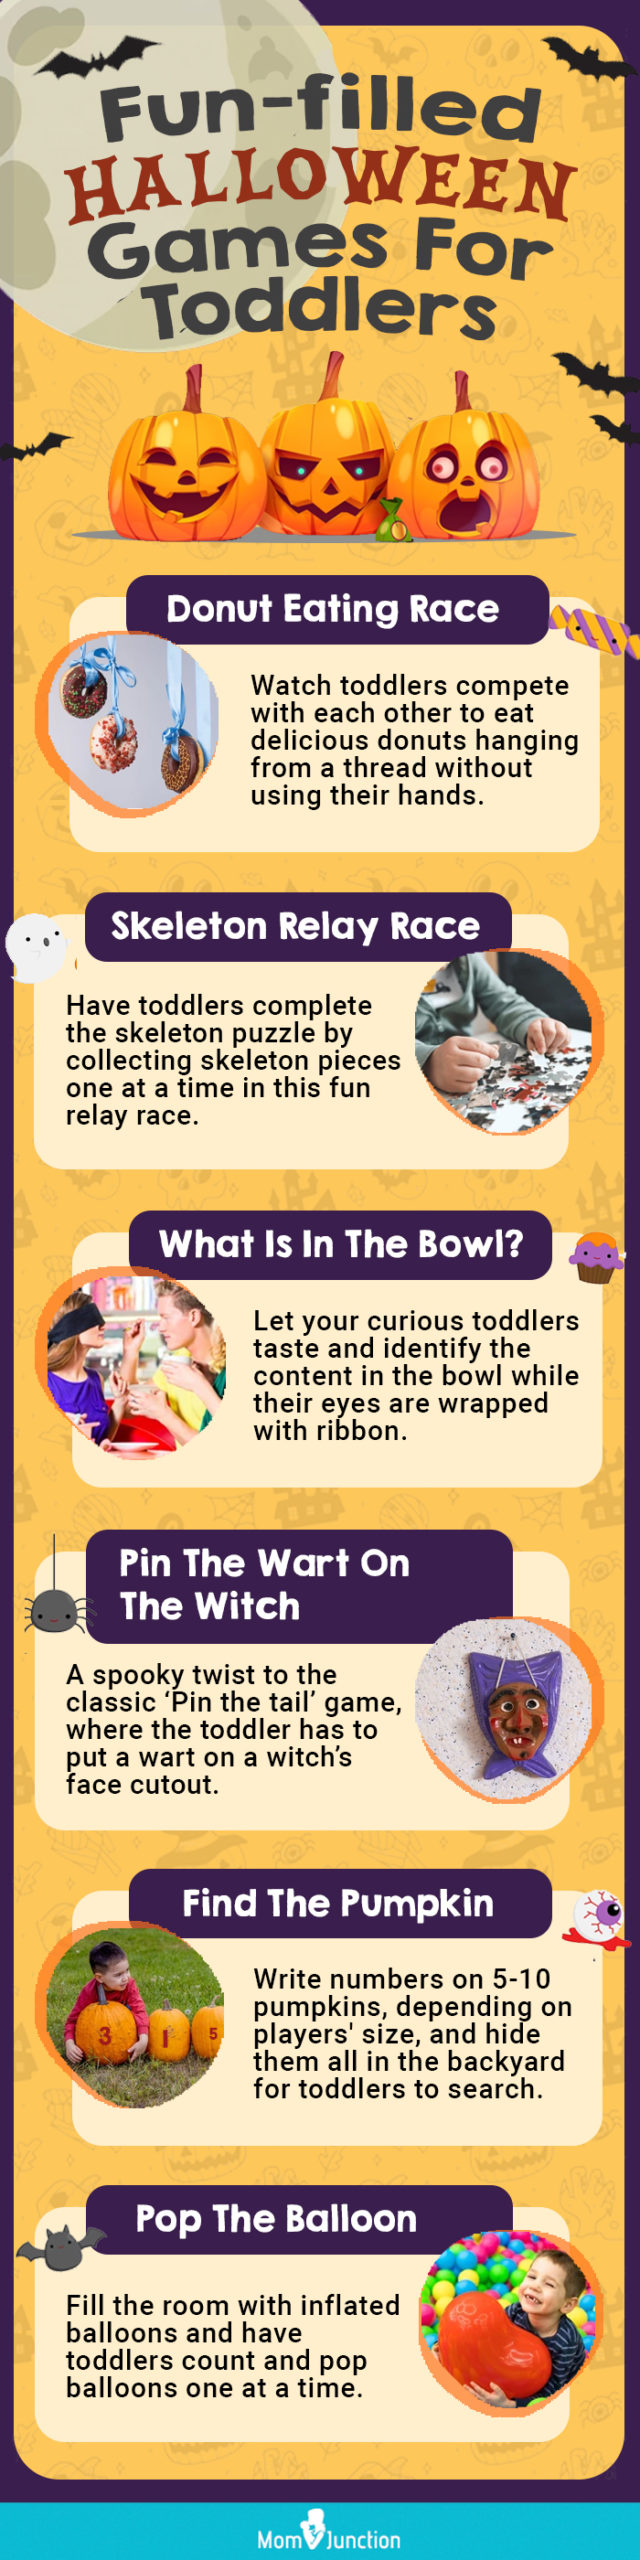 fun filled halloween games for toddlers (infographic)